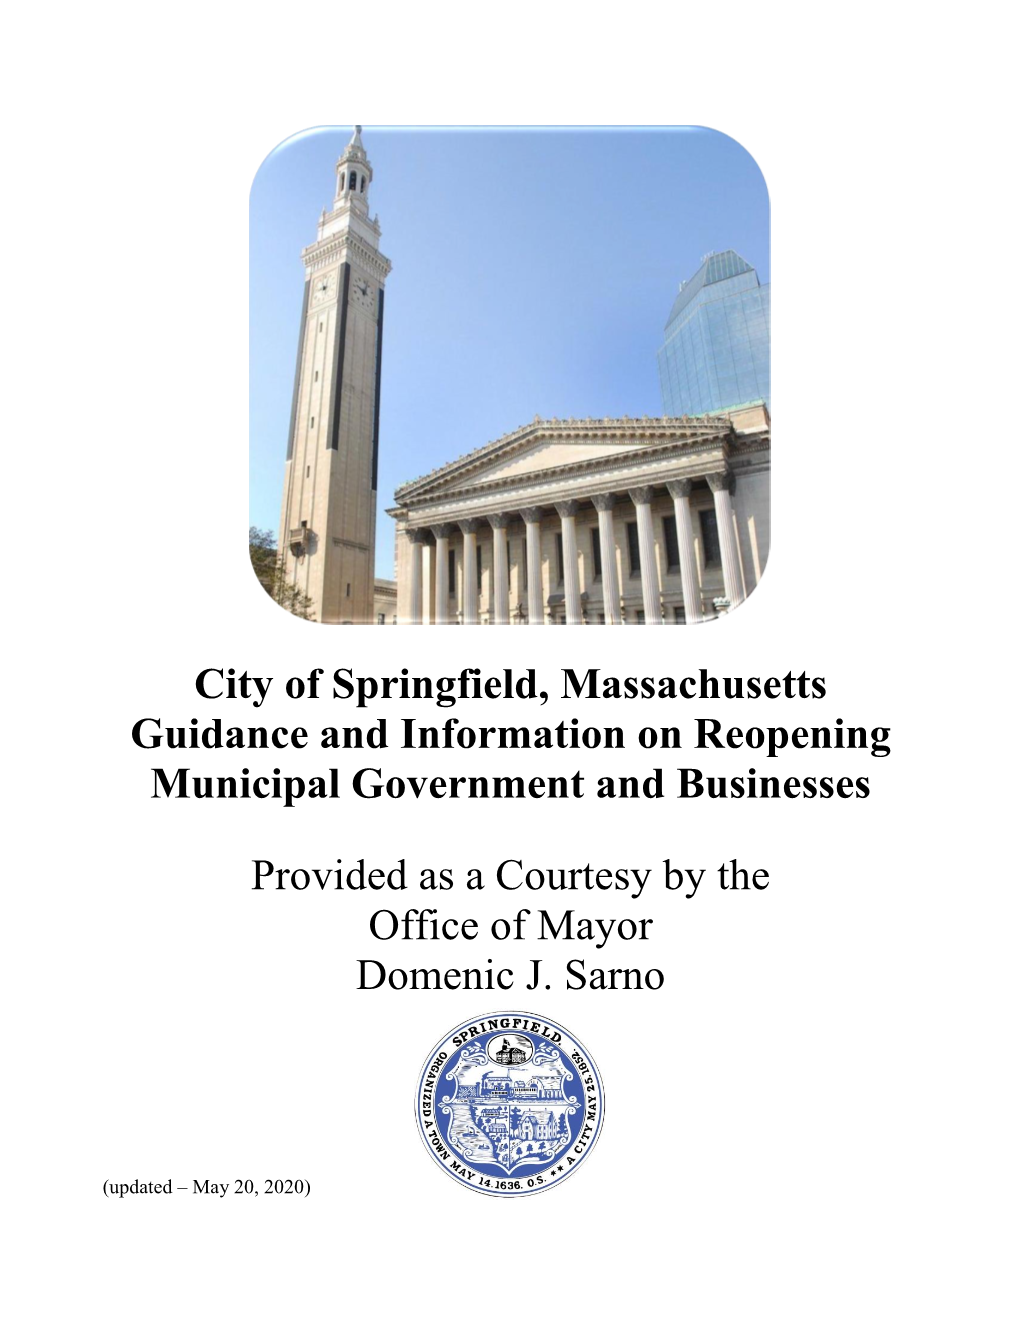 City of Springfield, Massachusetts Guidance and Information on Reopening Municipal Government and Businesses